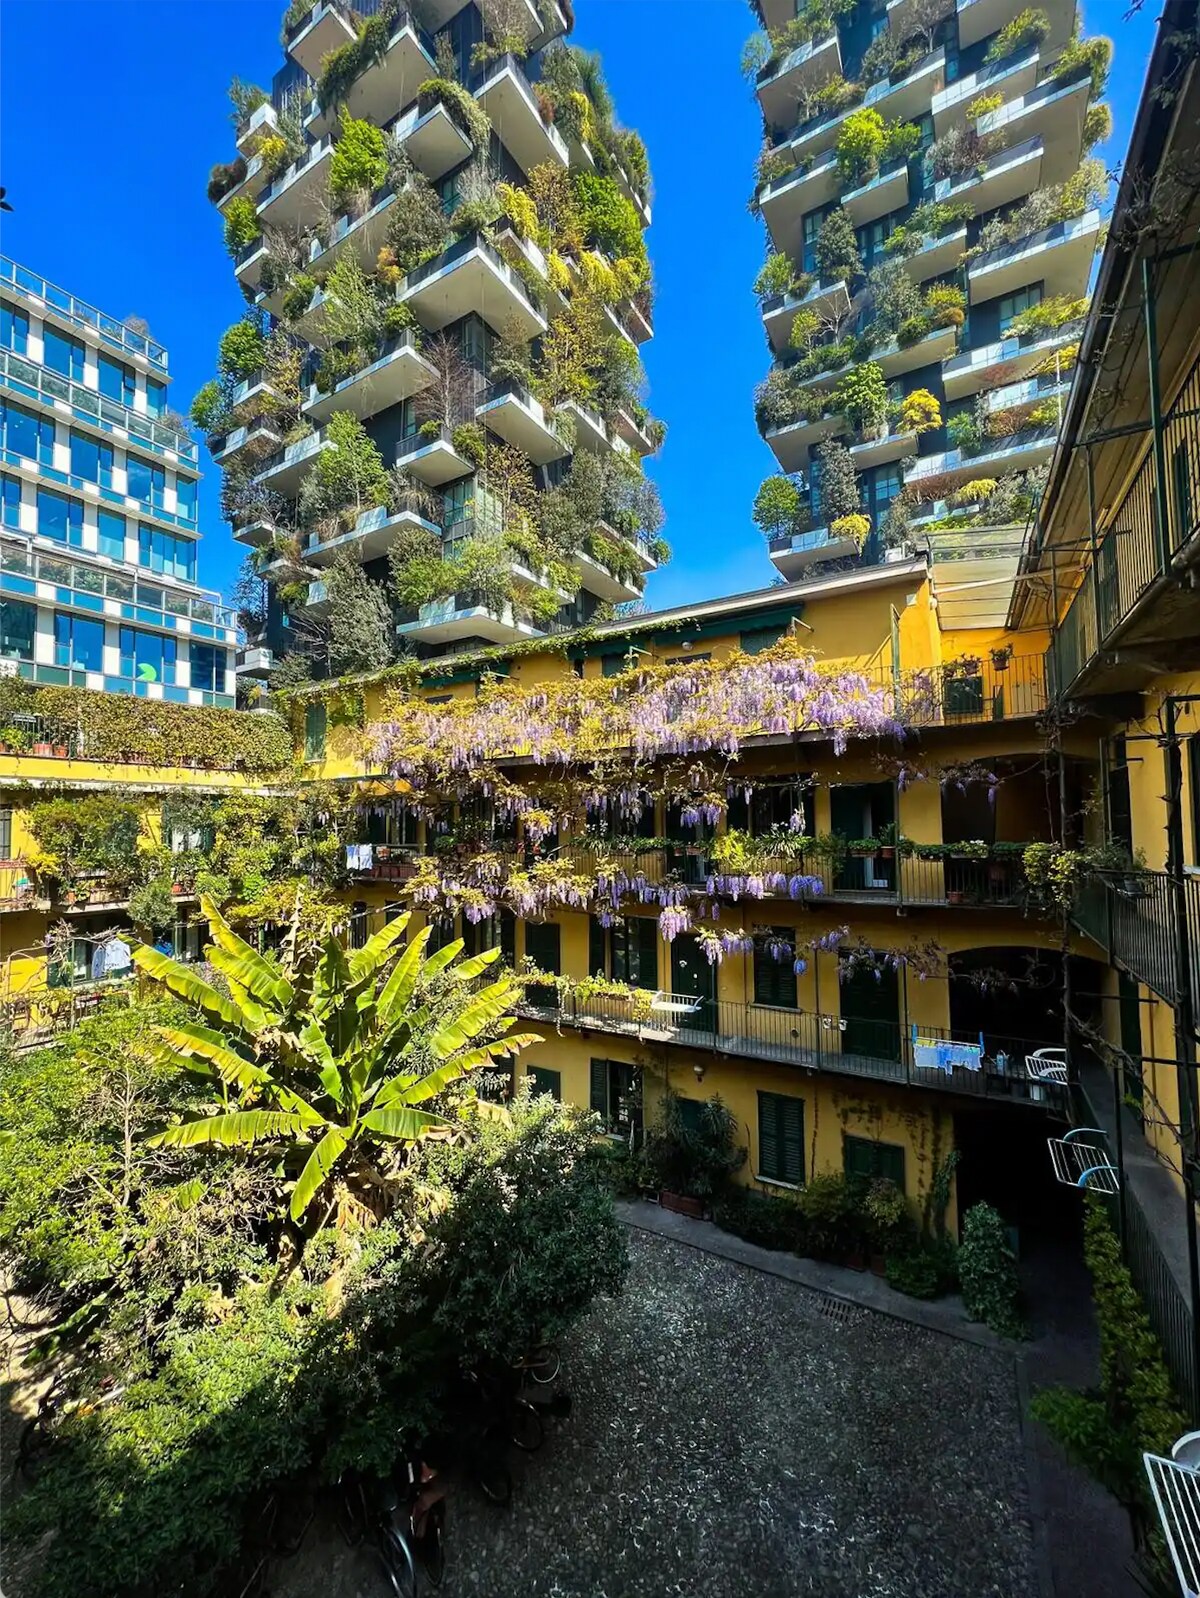 tHE Home Of Fame - Bosco Verticale View